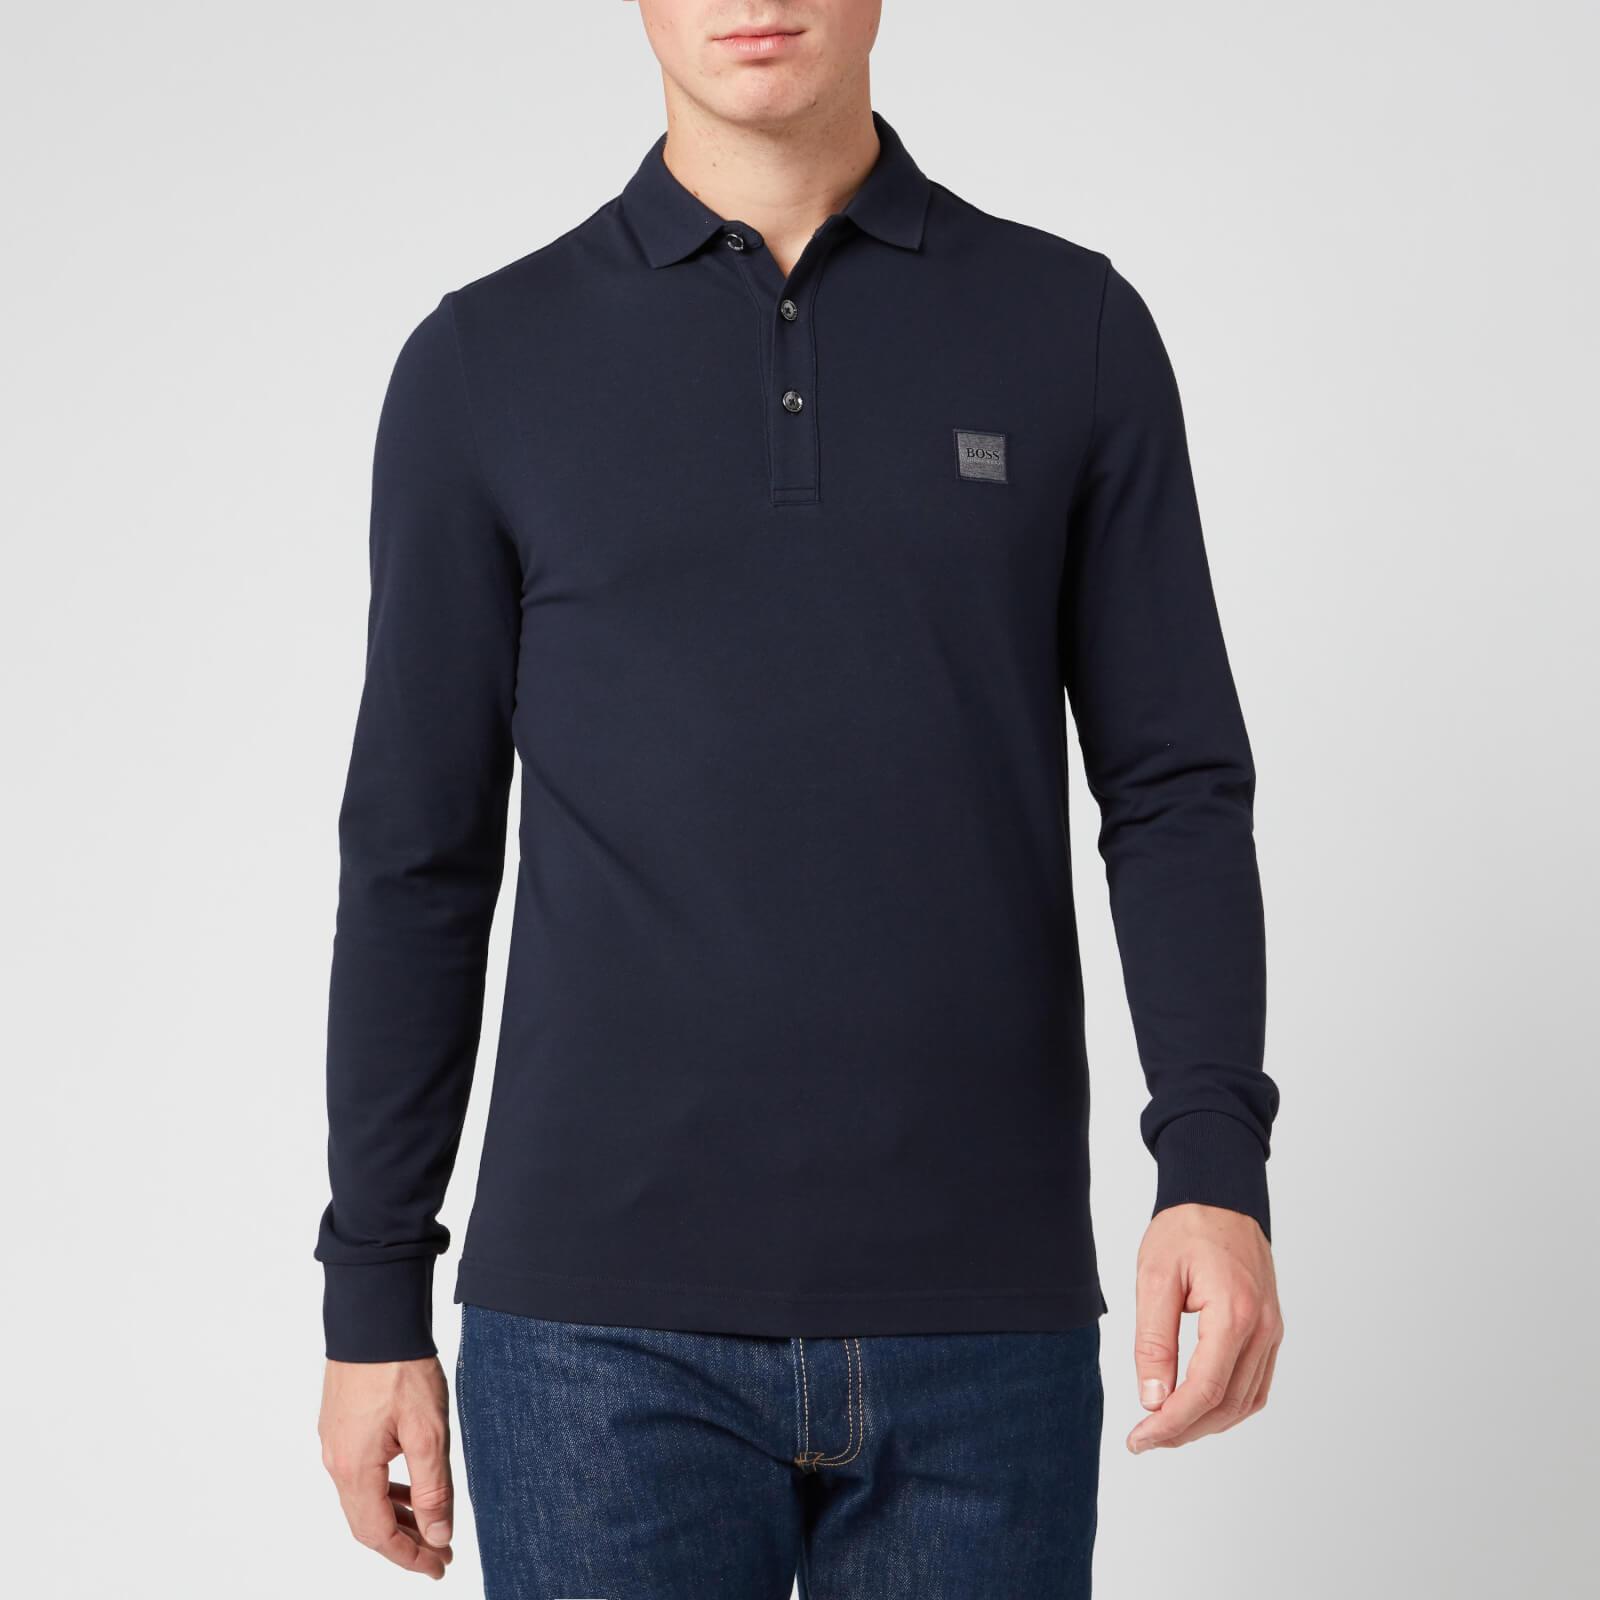 Hugo Boss Passerby Polo Top Sellers, SAVE 50%.